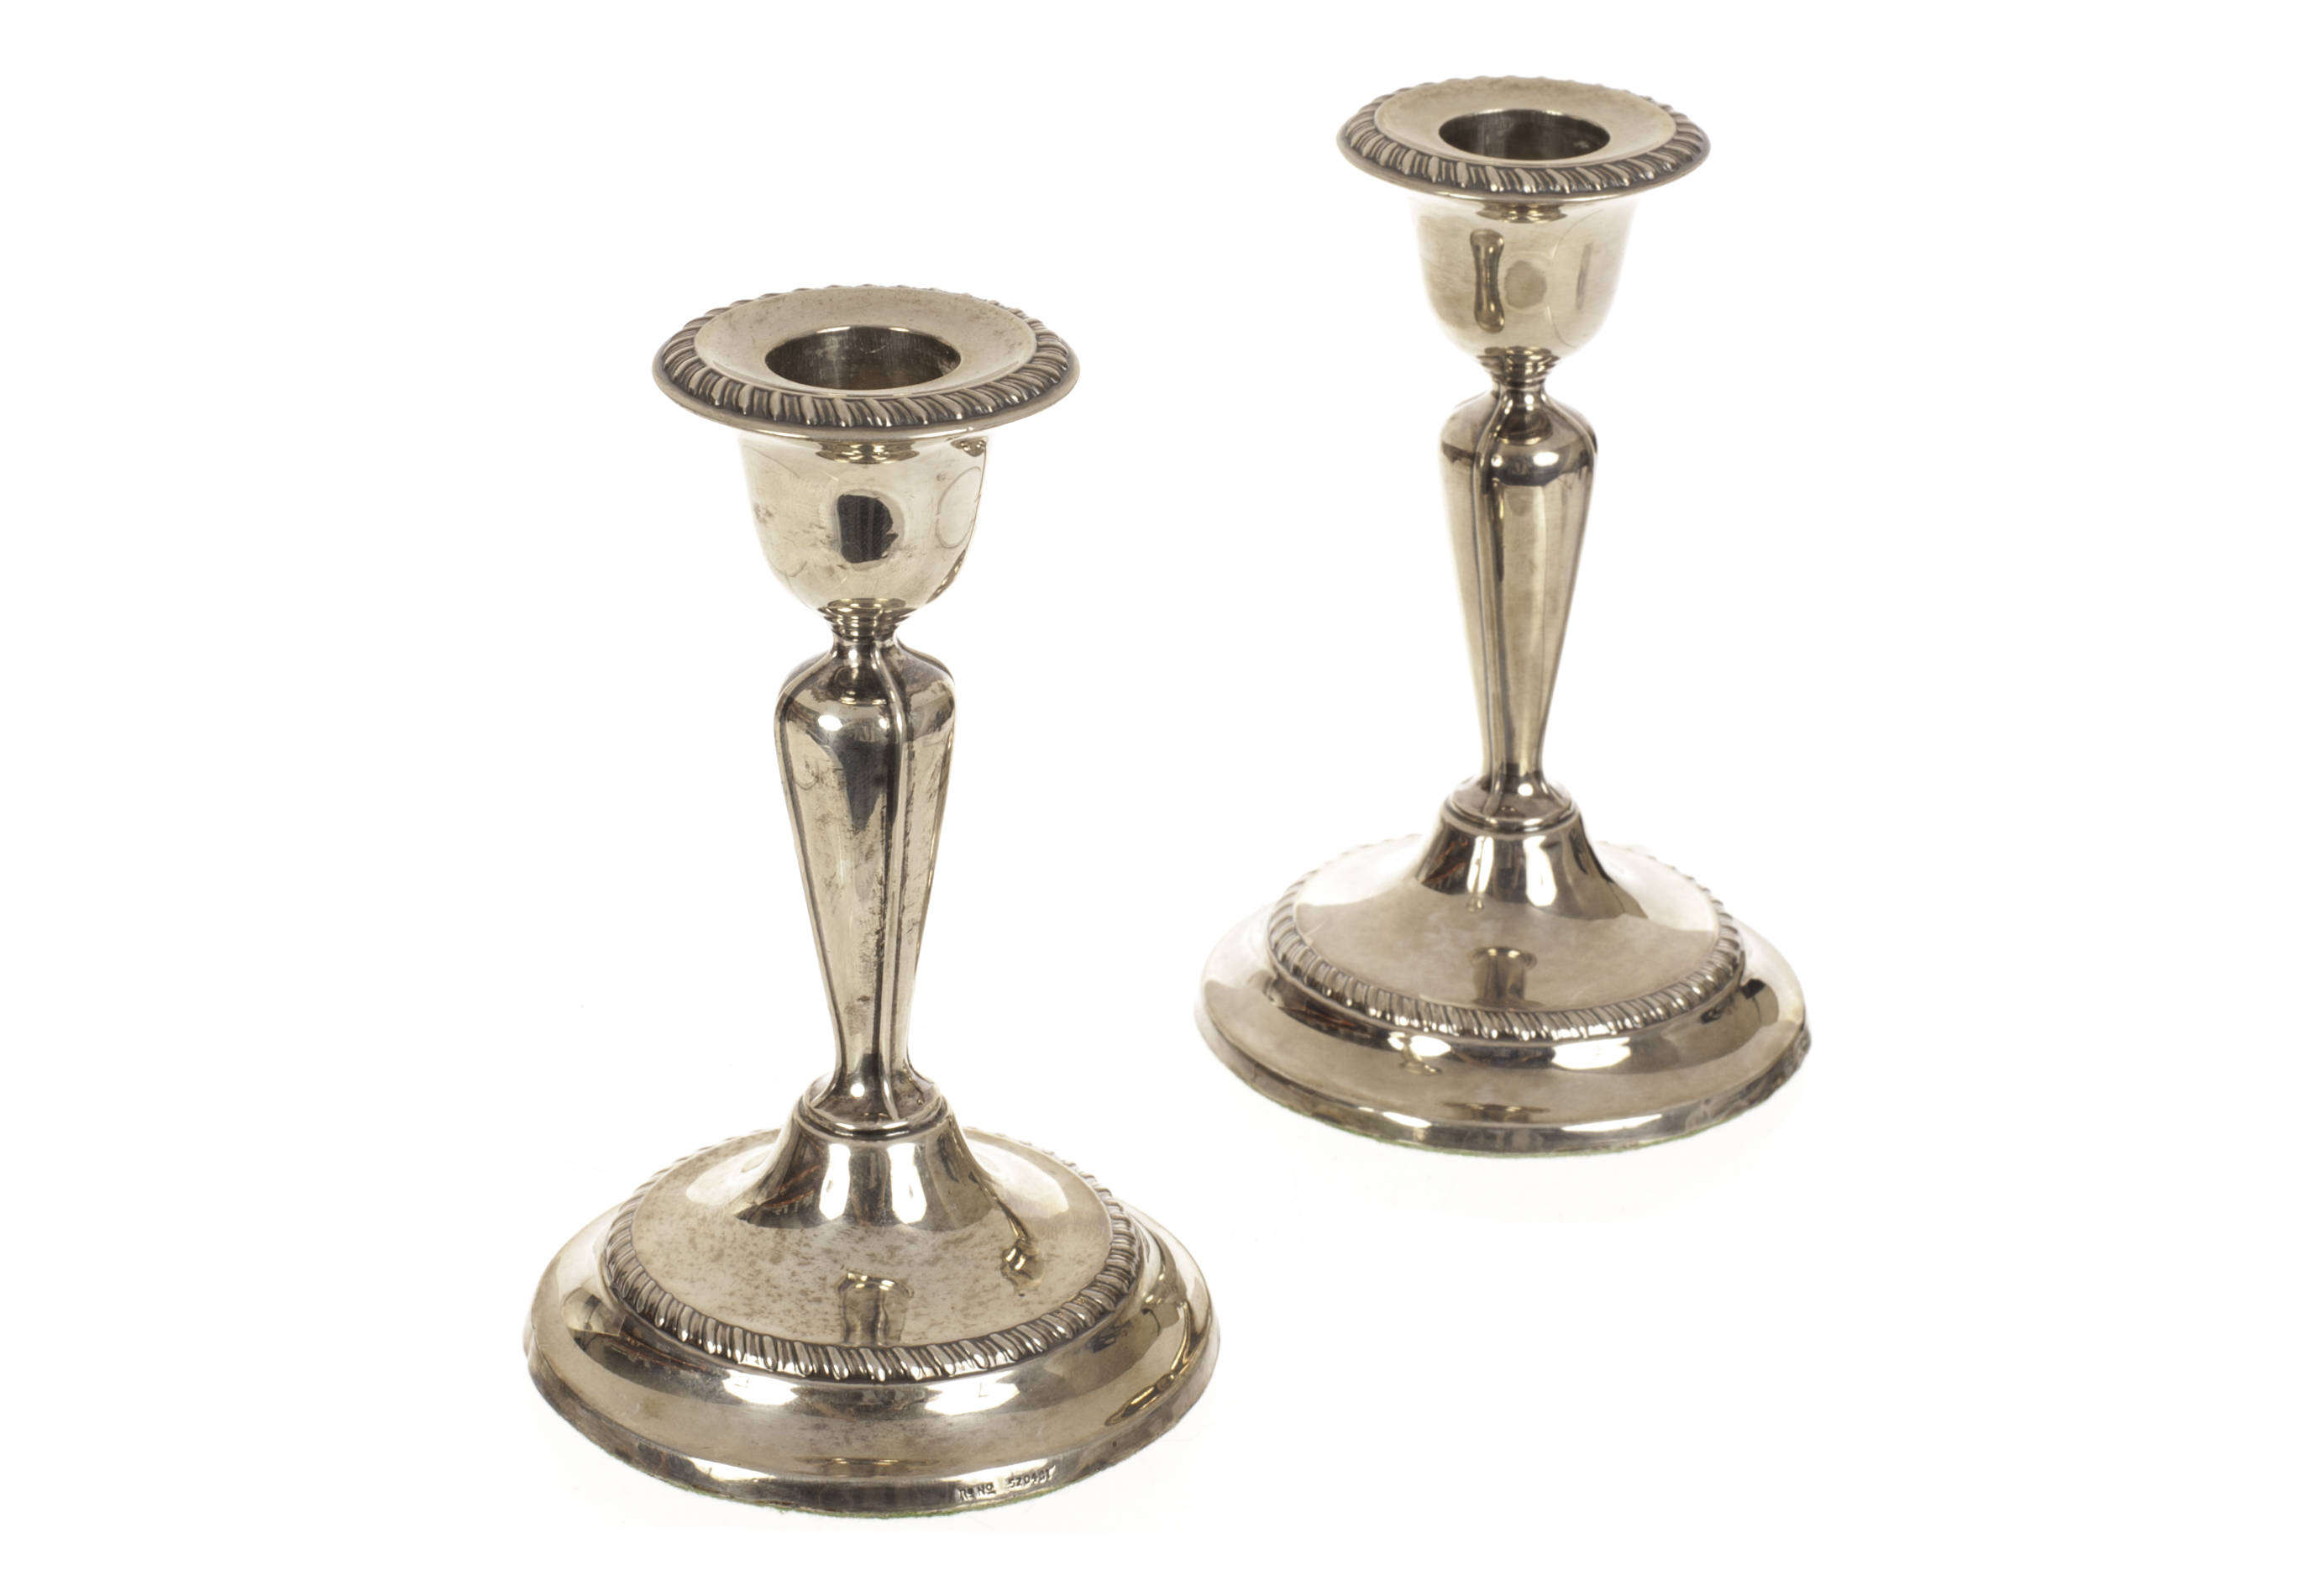 A pair of silver dwarf candlesticks, hallmarked Sheffield 1912, by Fordham & Faulkner, with loaded